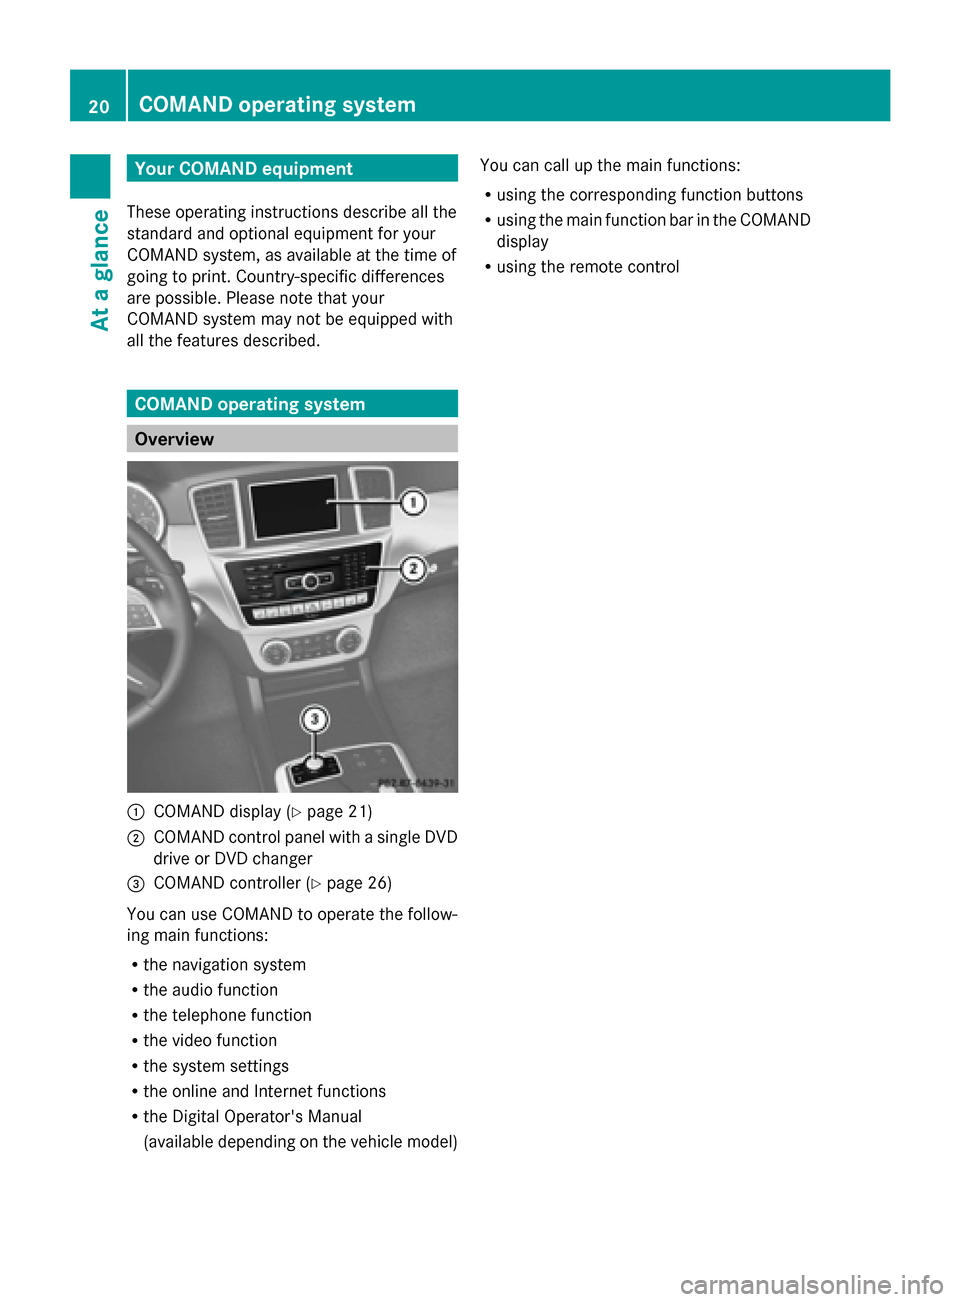 MERCEDES-BENZ GL-Class 2014 X166 Comand Manual Your COMAND equipment
These operating instructions describe all the
standard and optional equipment for your
COMAND system, as available at the time of
going to print. Country-specific differences
are